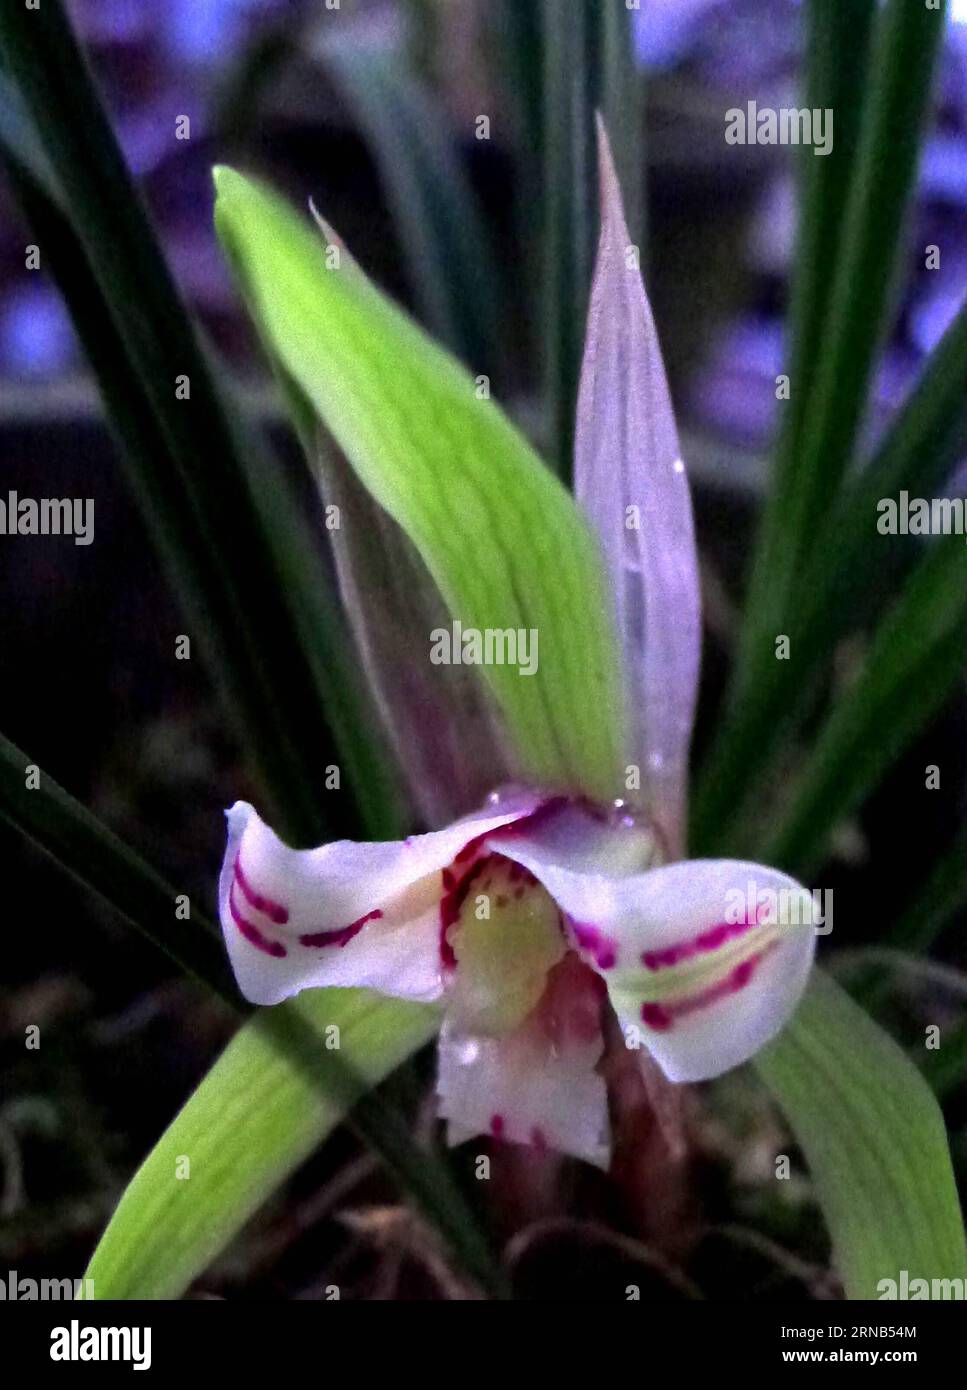 (160219) -- SUZHOU, Feb. 19, 2016 -- Photo taken on Feb. 19, 2016 shows an orchid at Canglang Pavilion in Suzhou, east China s Jiangsu Province. The ten-day 2016 Suzhou spring orchid show will kick off at in Suzhou on Feb. 20, 2016 and showcase over 2,00O orchids of 70 varieties. ) (yxb) CHINA-SUZHOU-ORCHID-EXHIBITON(CN) WangxJianzhong PUBLICATIONxNOTxINxCHN   Suzhou Feb 19 2016 Photo Taken ON Feb 19 2016 Shows to Orchid AT Canglang Pavilion in Suzhou East China S Jiangsu Province The ten Day 2016 Suzhou Spring Orchid Show will Kick off AT in Suzhou ON Feb 20 2016 and Showcase Over 2  Orchids Stock Photo